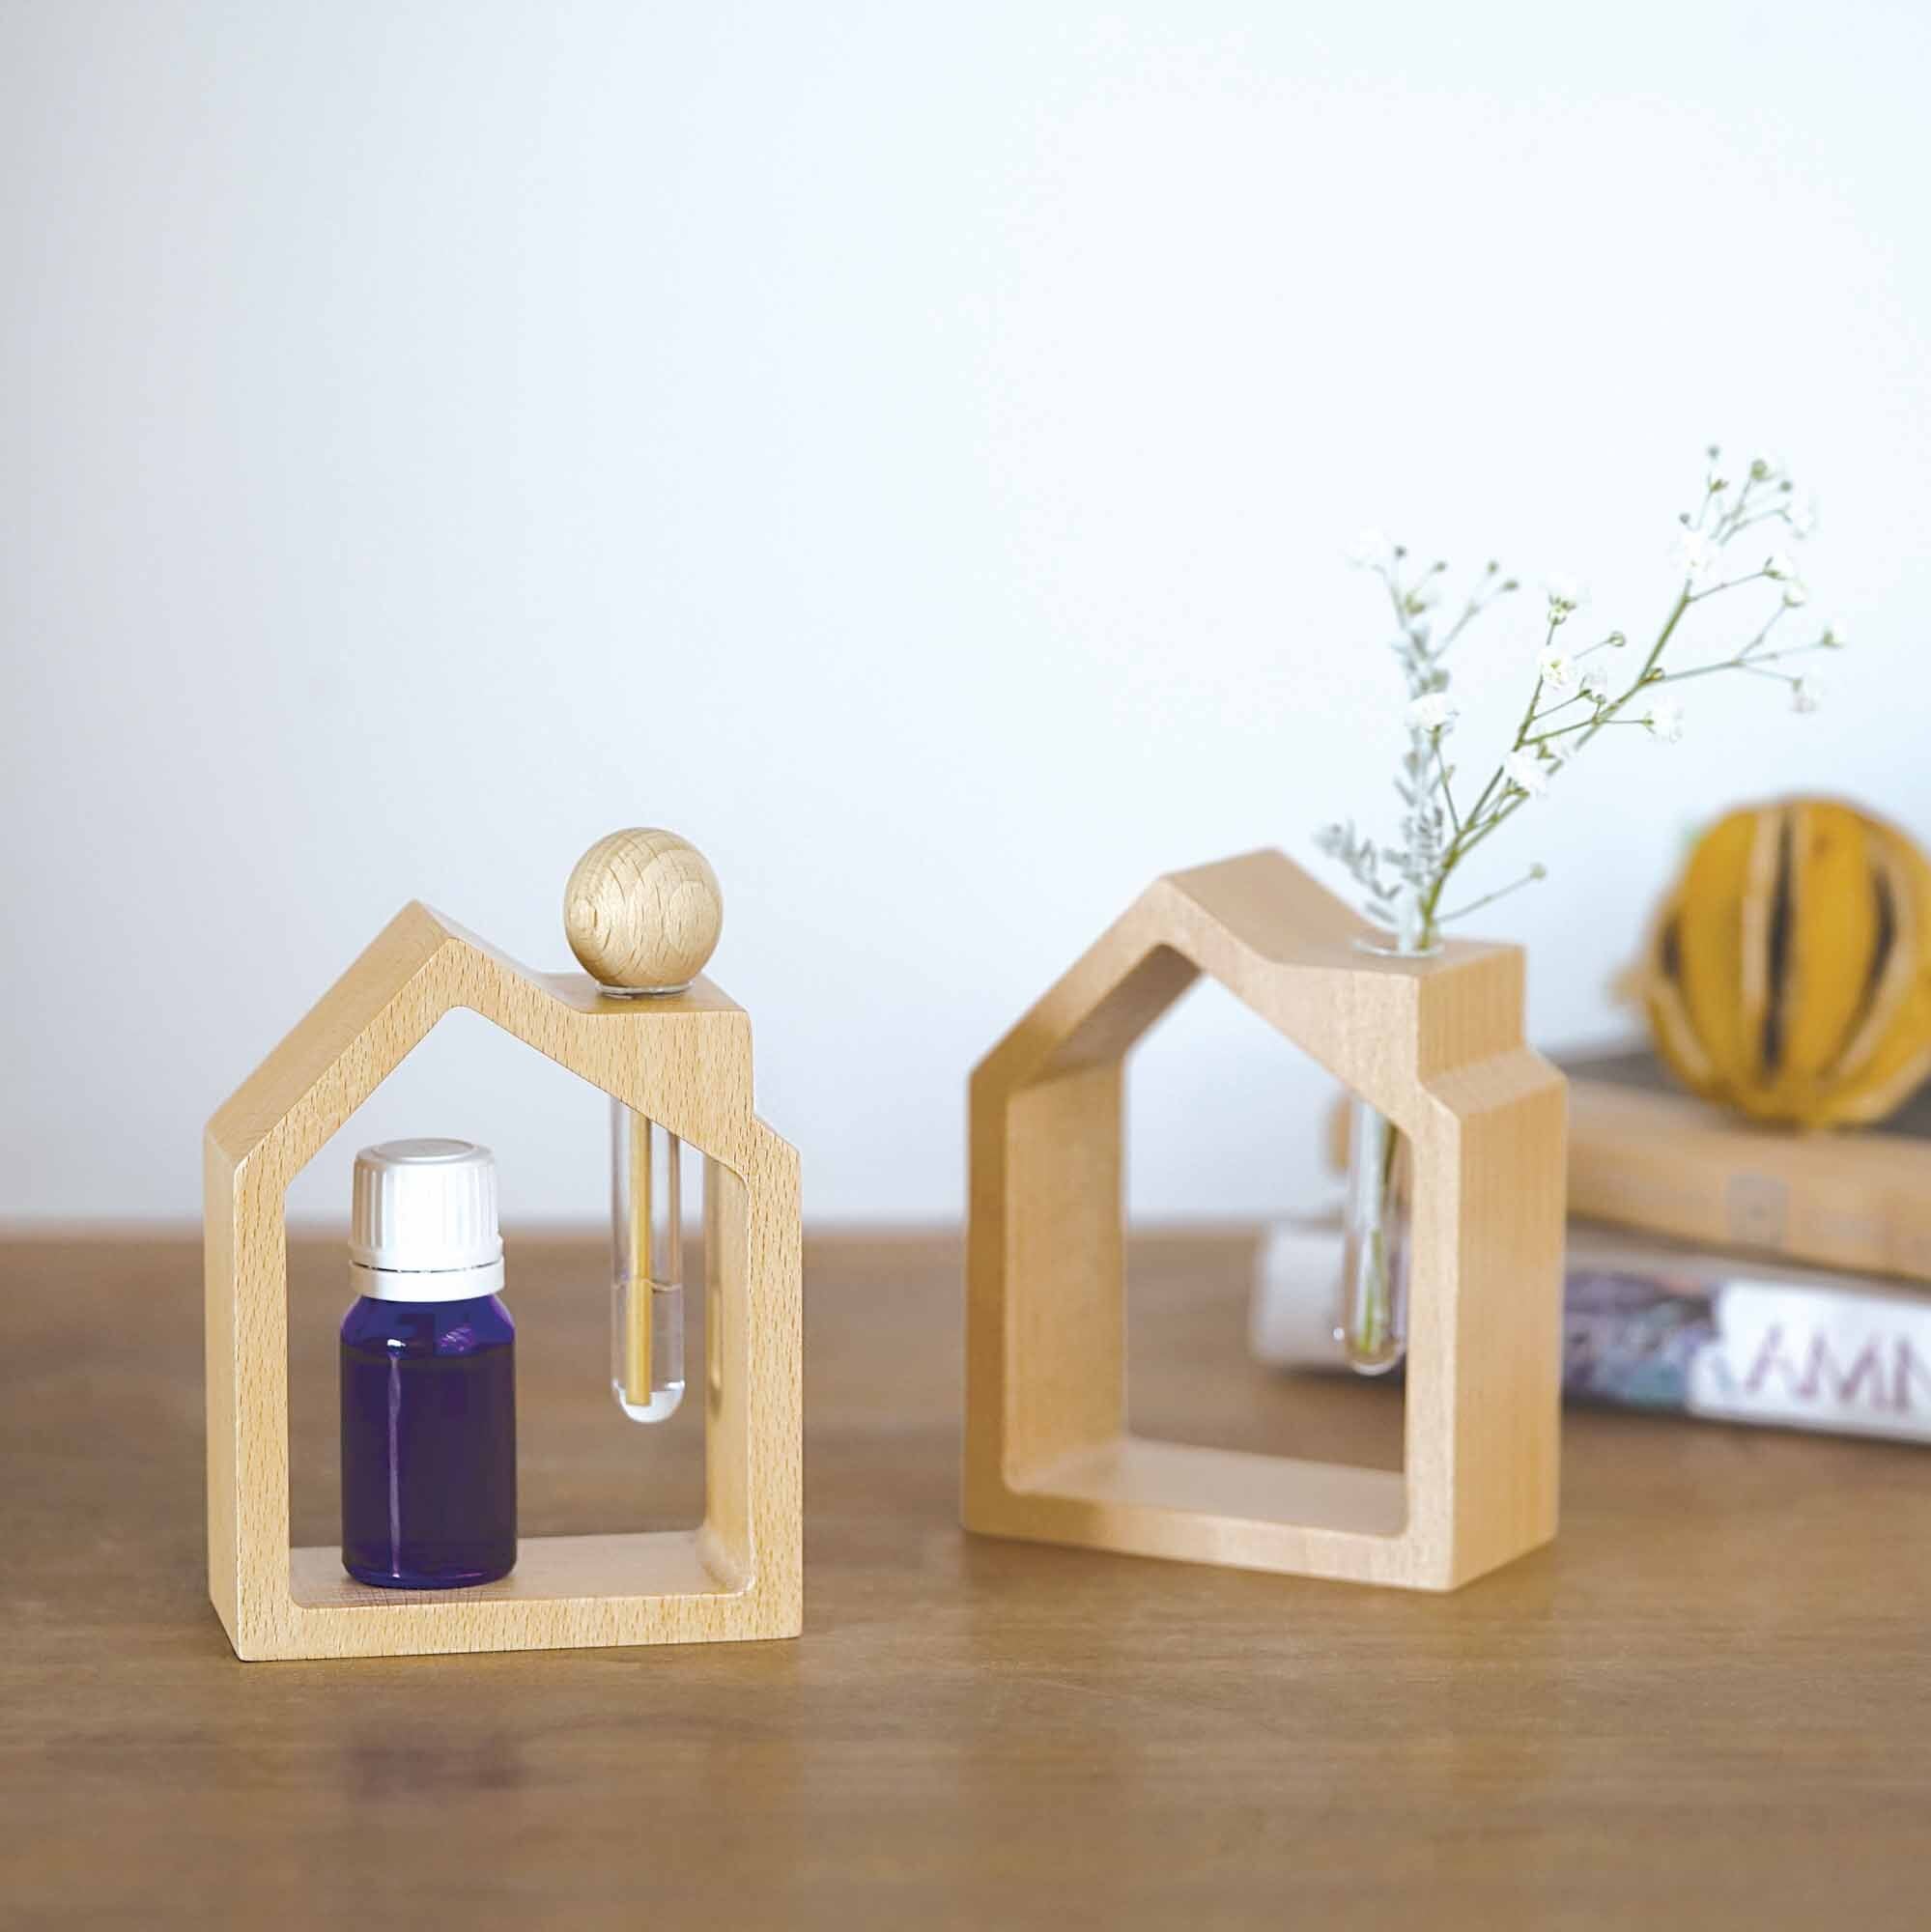 Two wooden house frames with wooden sticks shaped like a popsicle in front with small brown essential oils bottle and  pampas on the other house vile. Both houses set on a wood table with  two books and a light brown background.